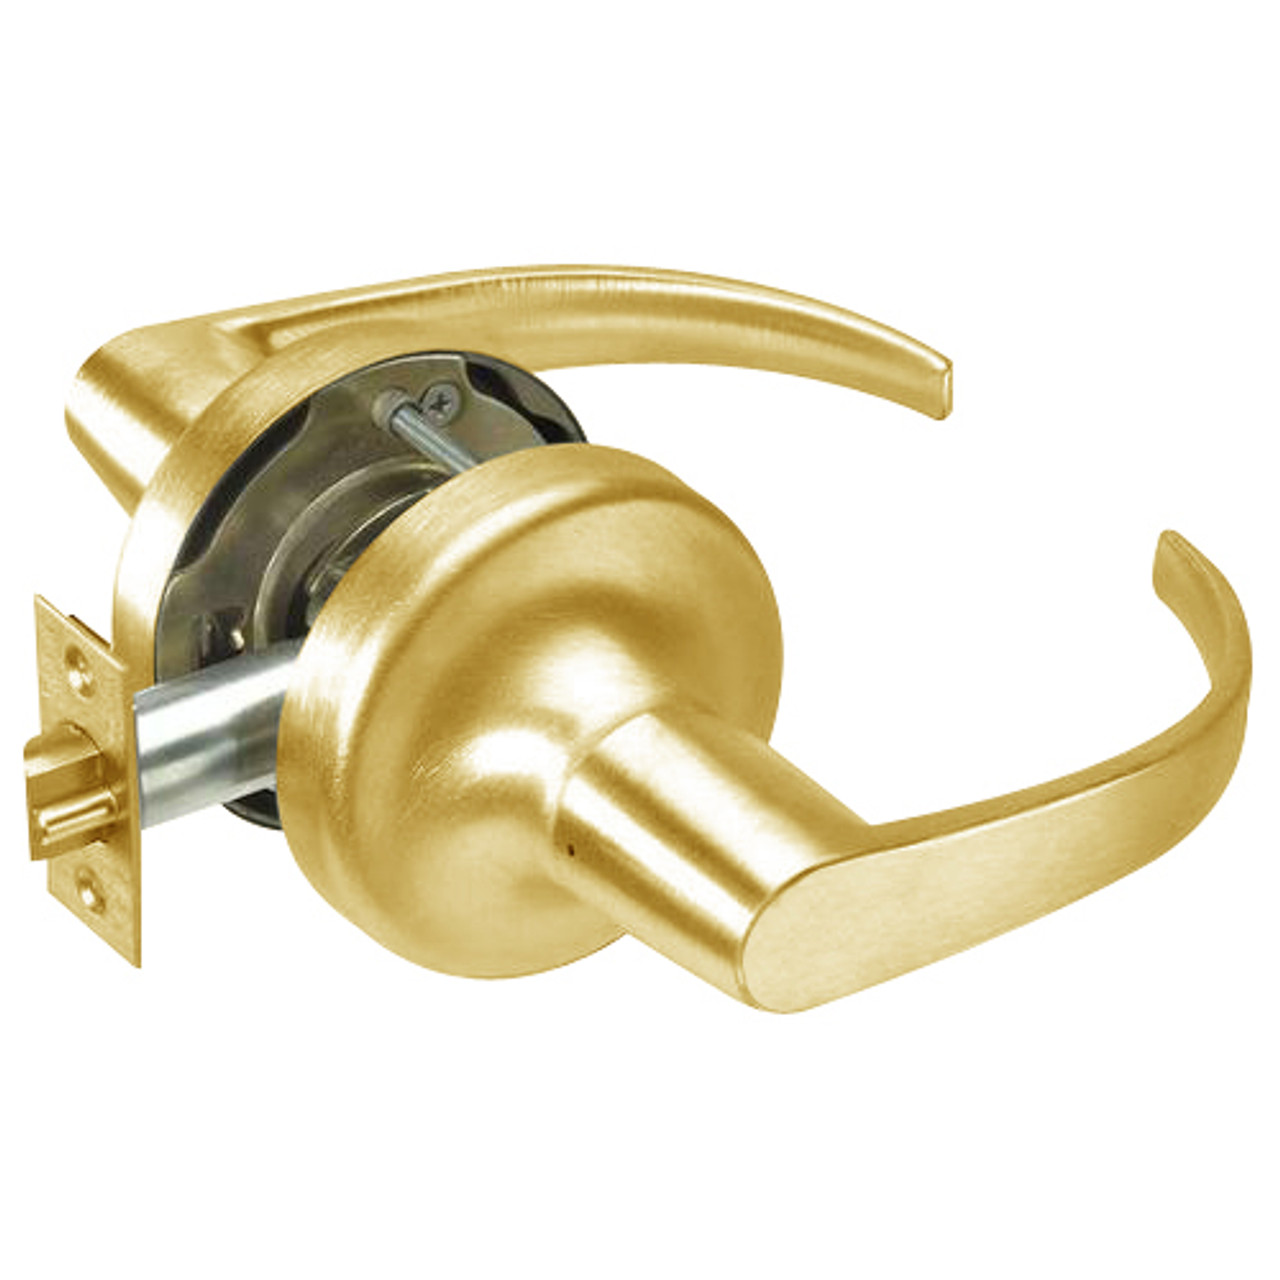 PB5301LN-605 Yale 5300LN Series Non-Keyed Passage or Closet Latchset Cylindrical Locks with Pacific Beach Lever in Bright Brass